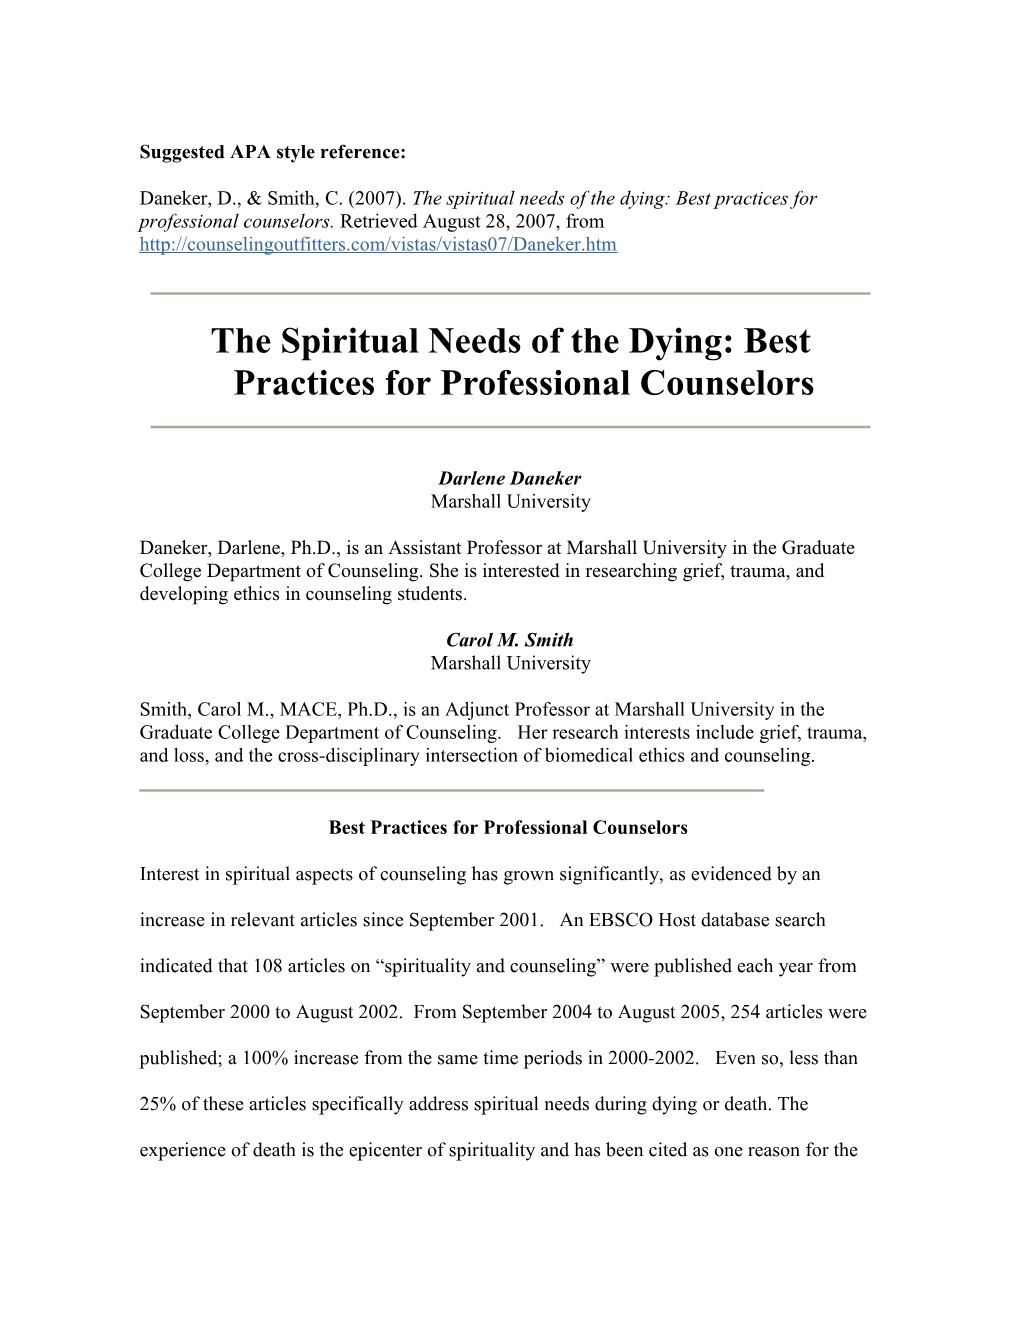 The Spiritual Needs of the Dying: Best Practices for Professional Counselors